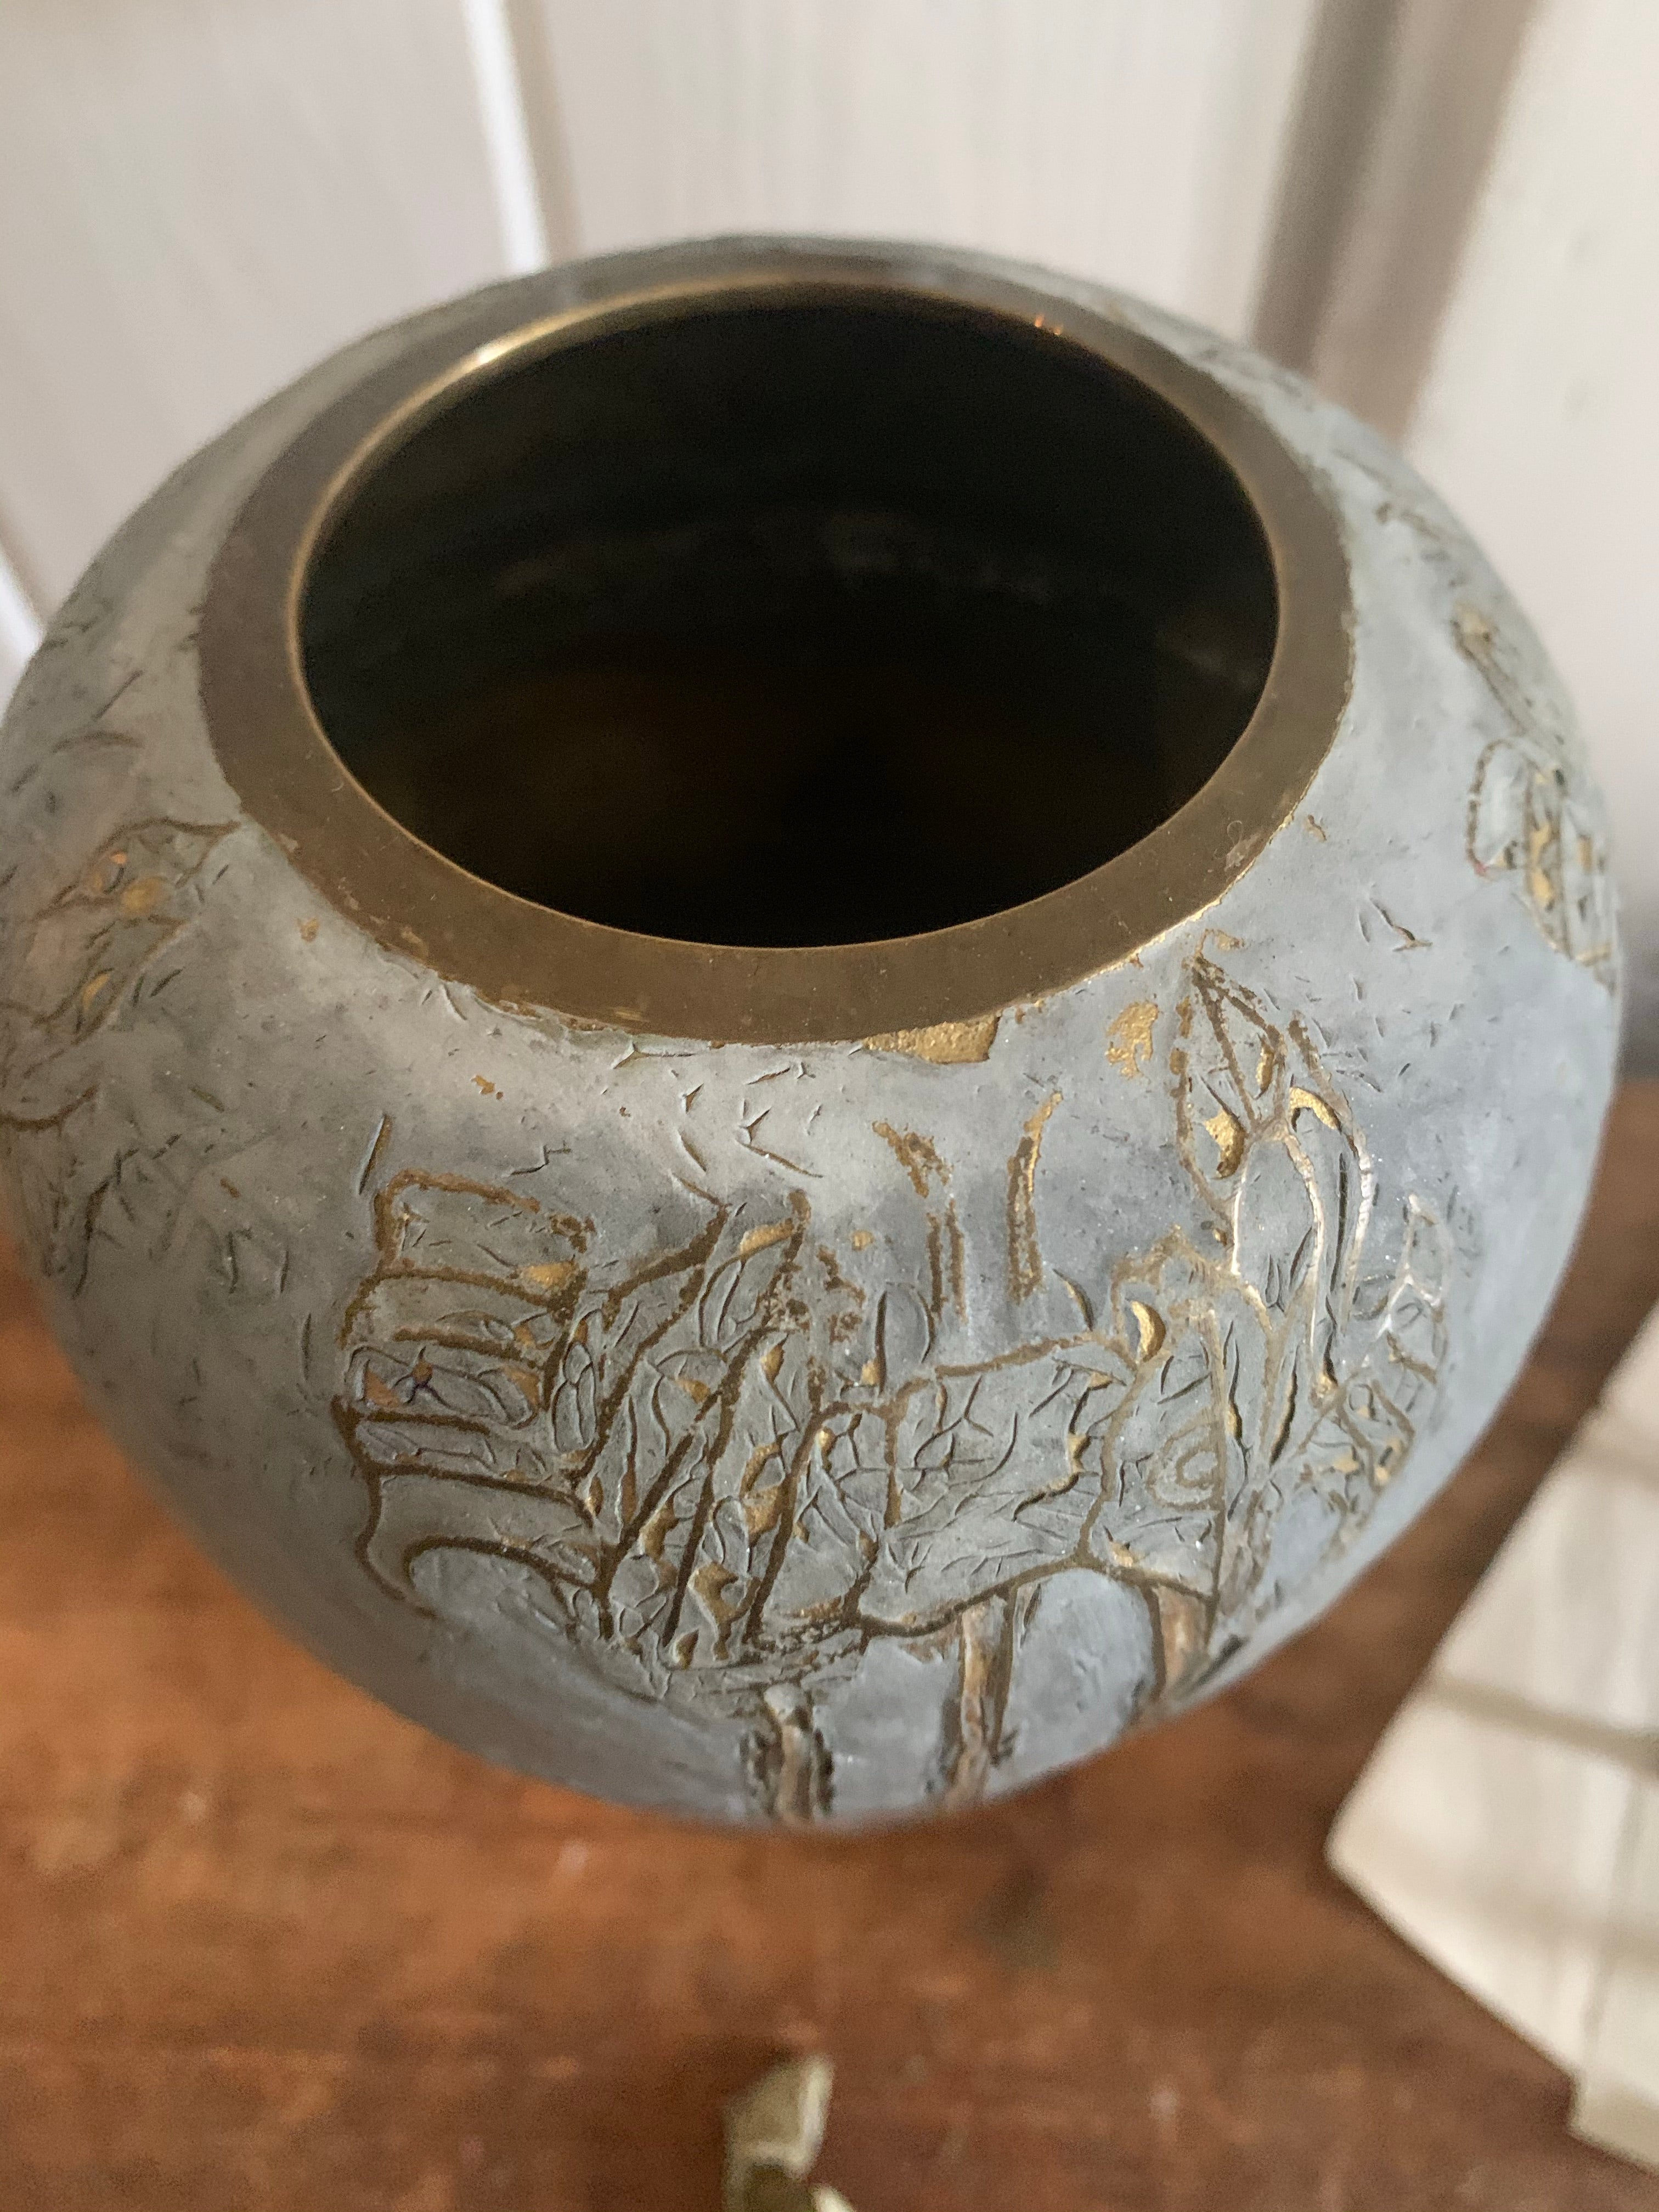 Metal Vase with Decorative Gold Detail